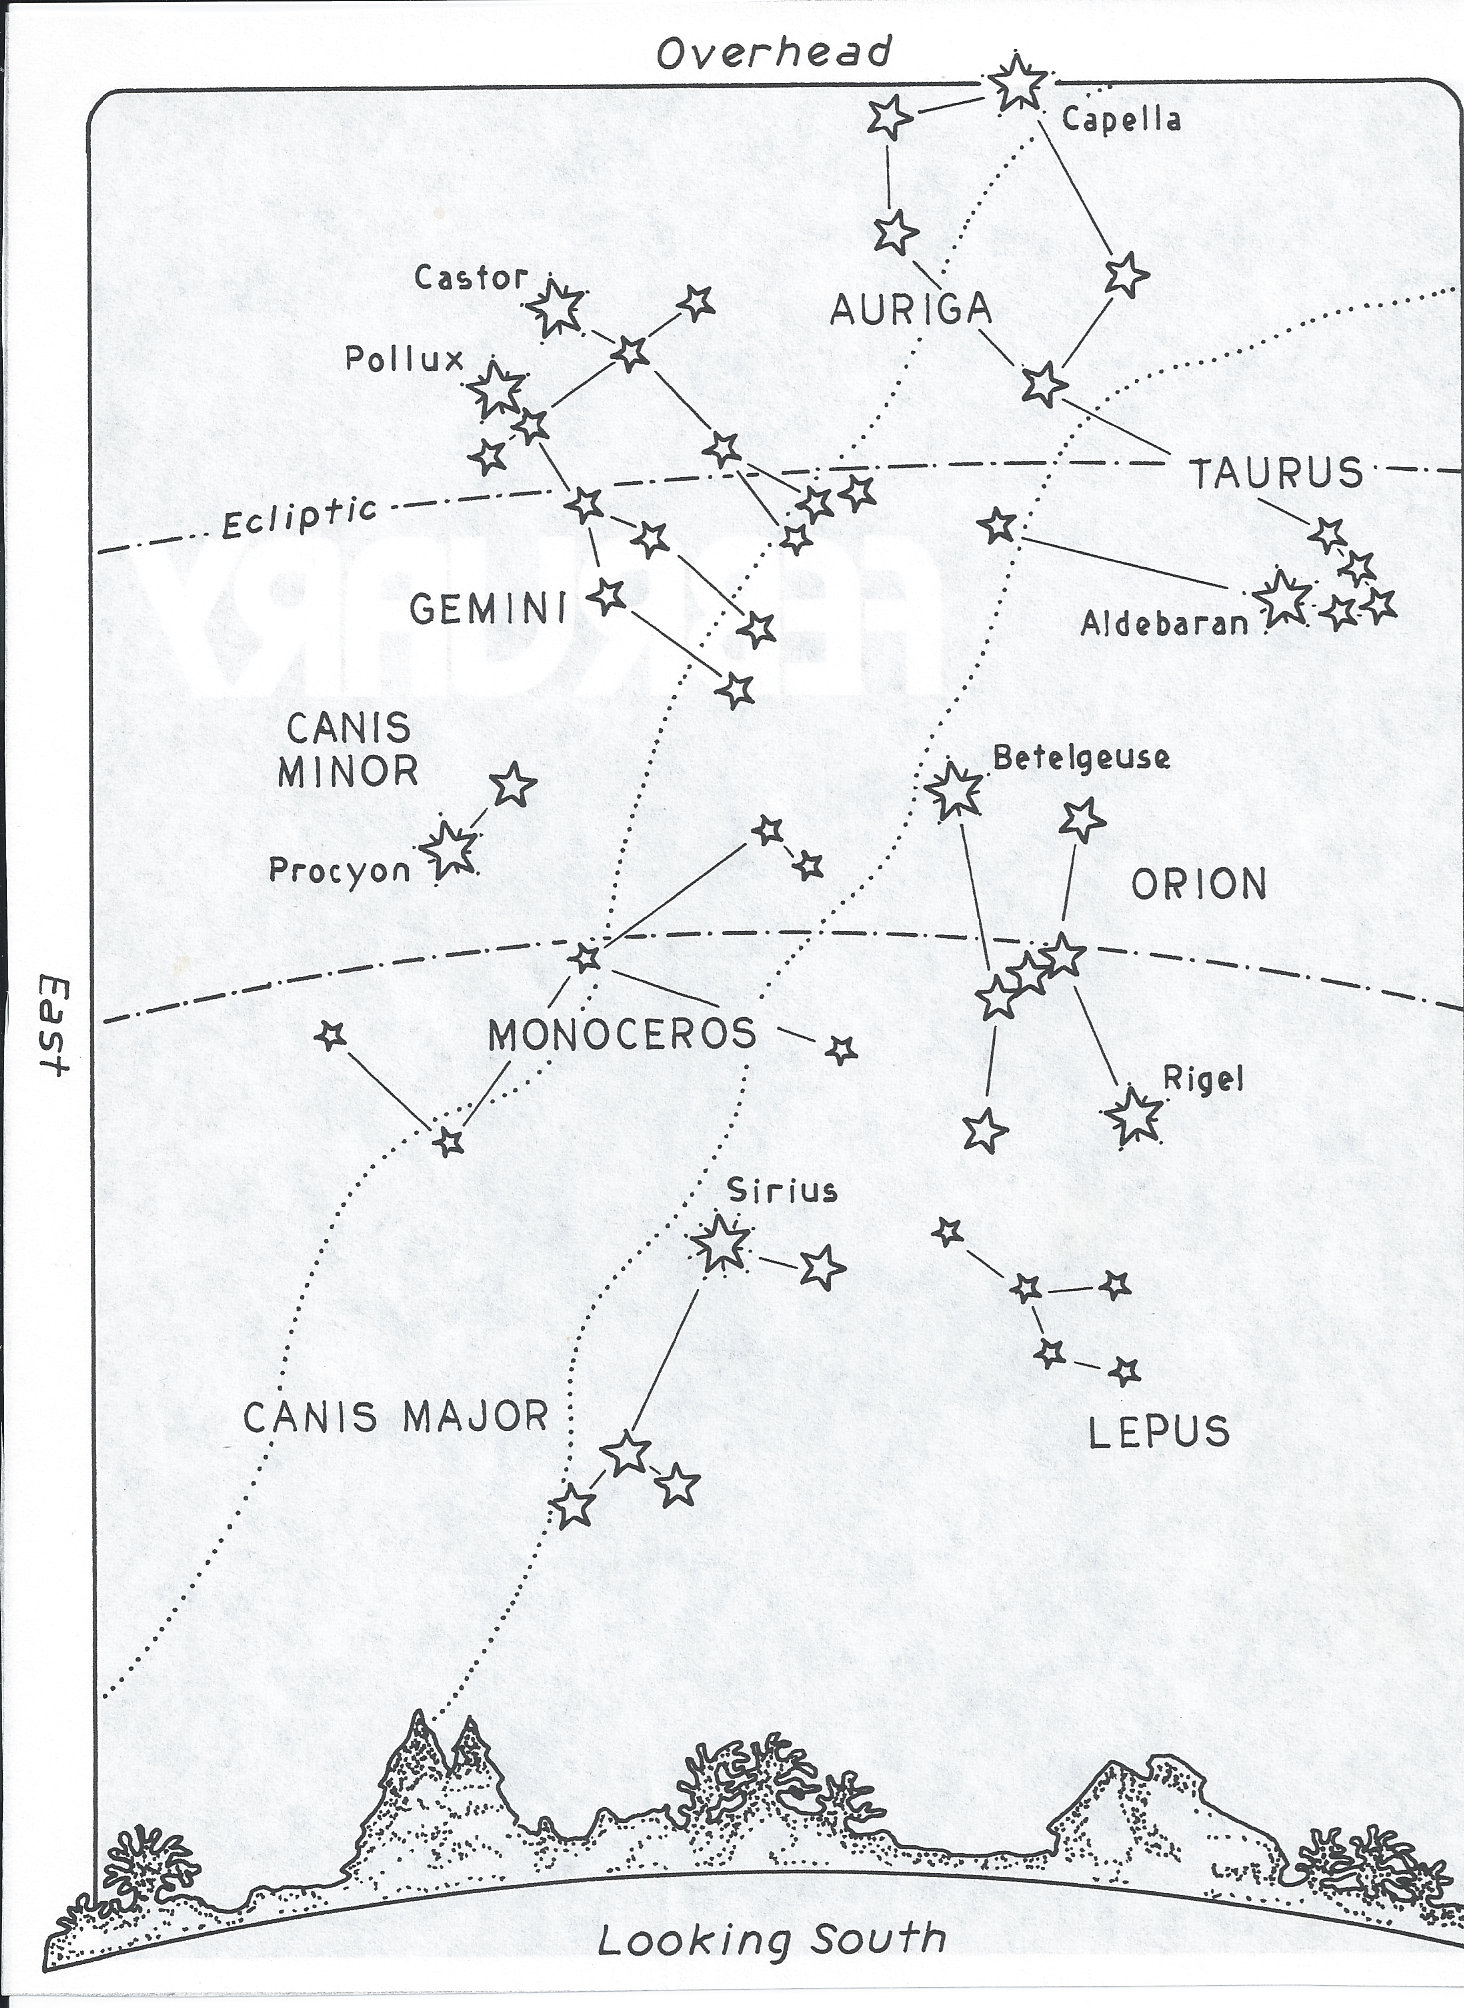 August Star Map